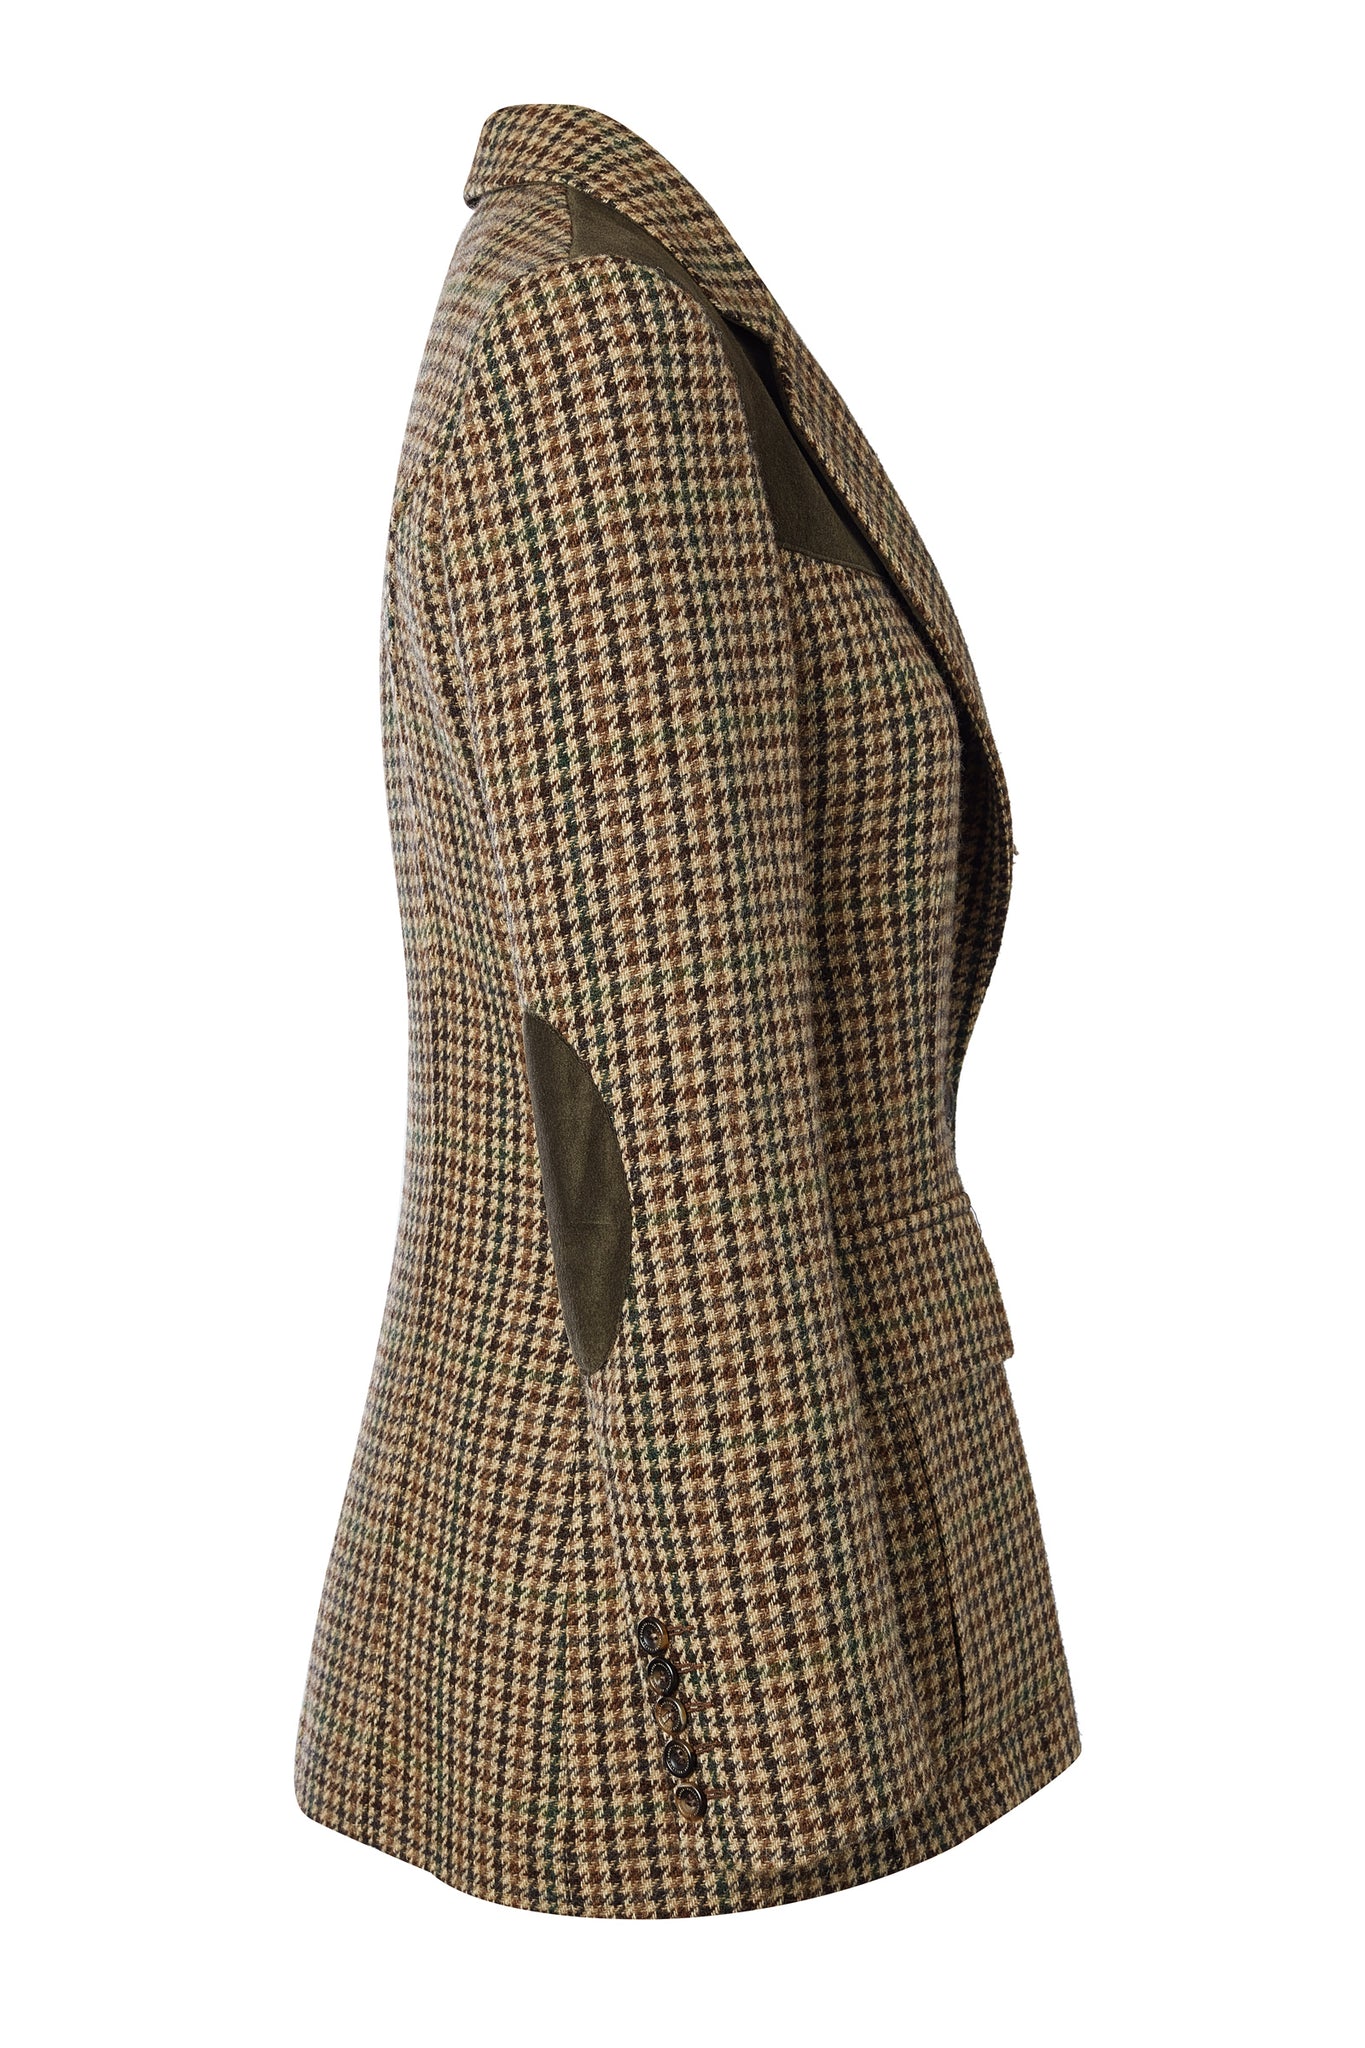 side of womens classic slim fit single breasted blazer in green tan and brown houndstooth tweed with lower patch pockets with concealed button flap contrast khaki suede shoulder gun patch with elbow patches and horn button finish on cuffs and front